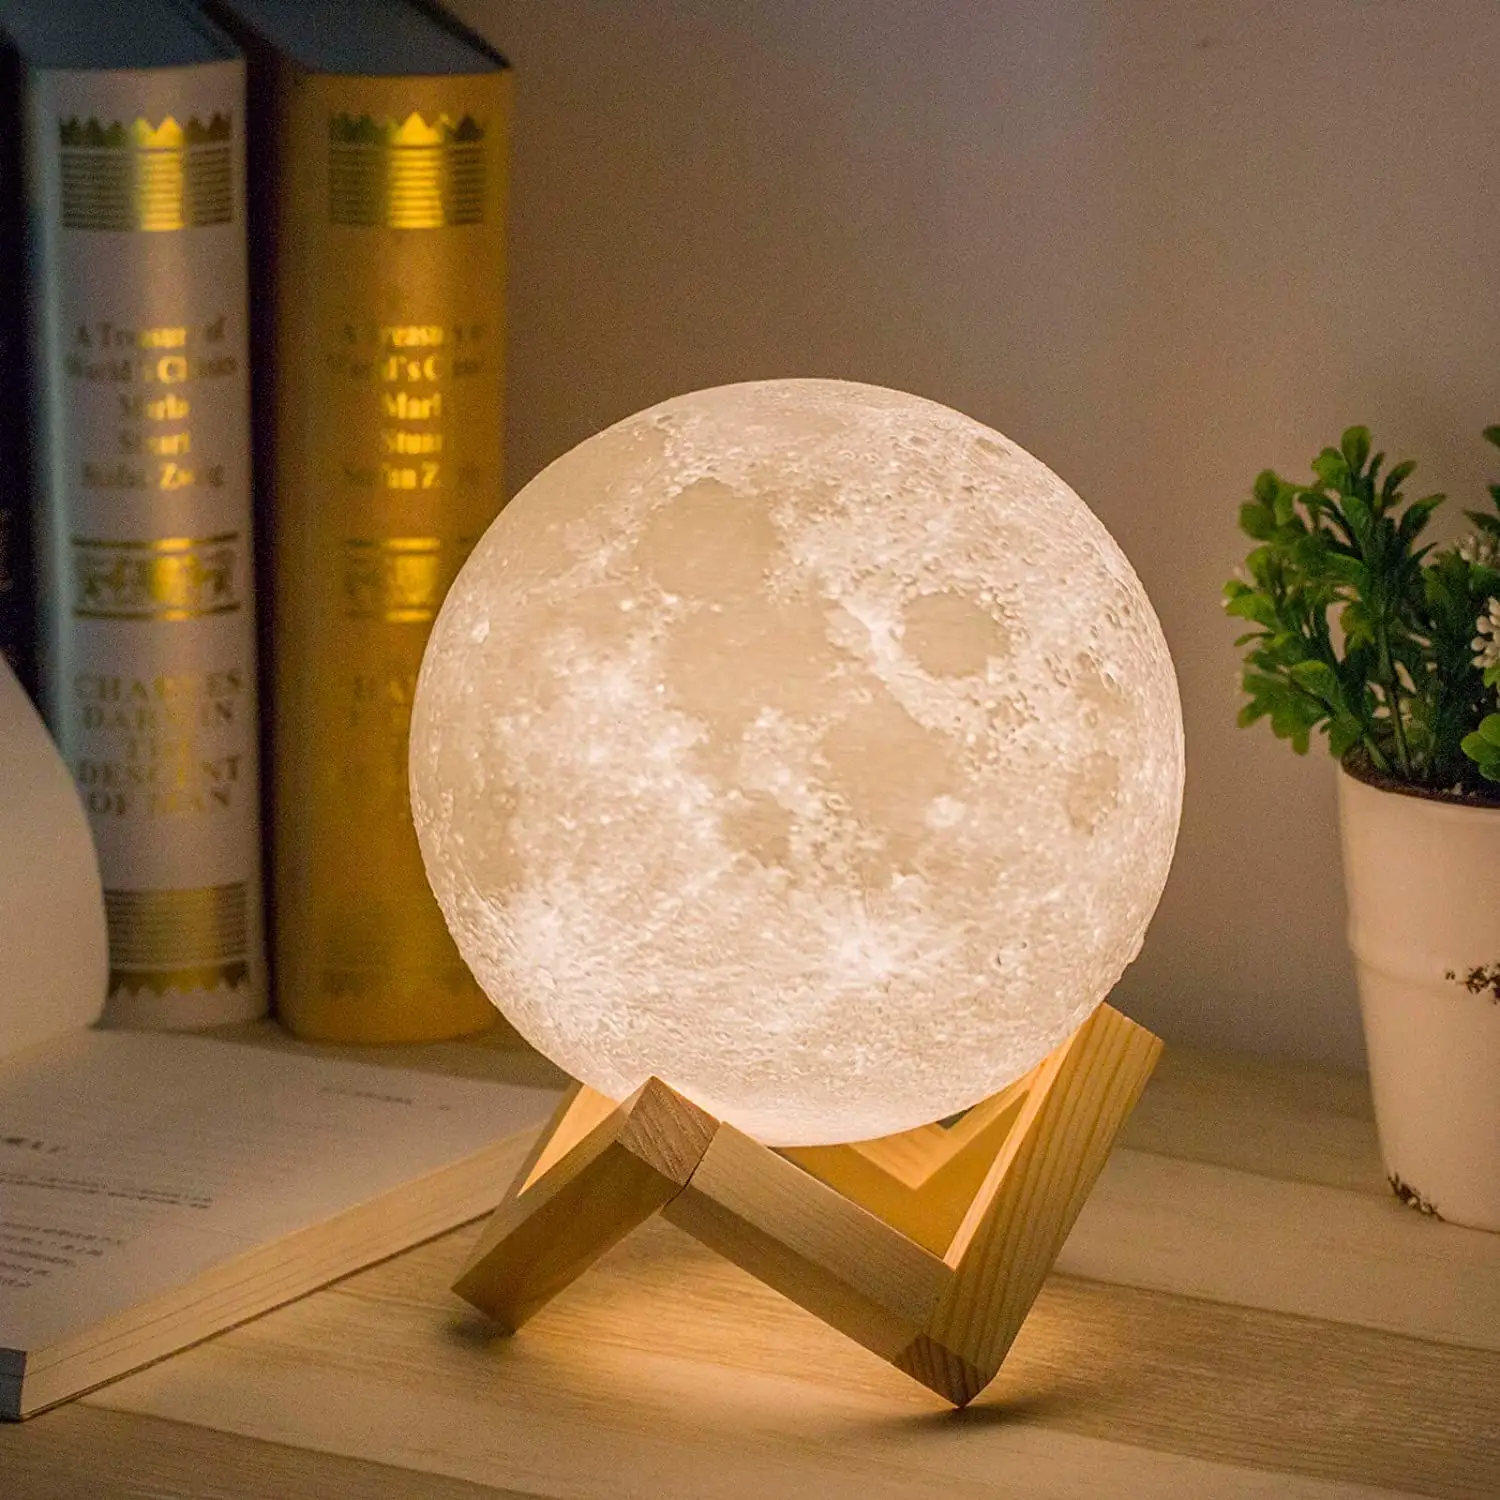 Promotional moon model 16 colors with remote & touch control Night Light gifts for girls birthday gift set unique gifts